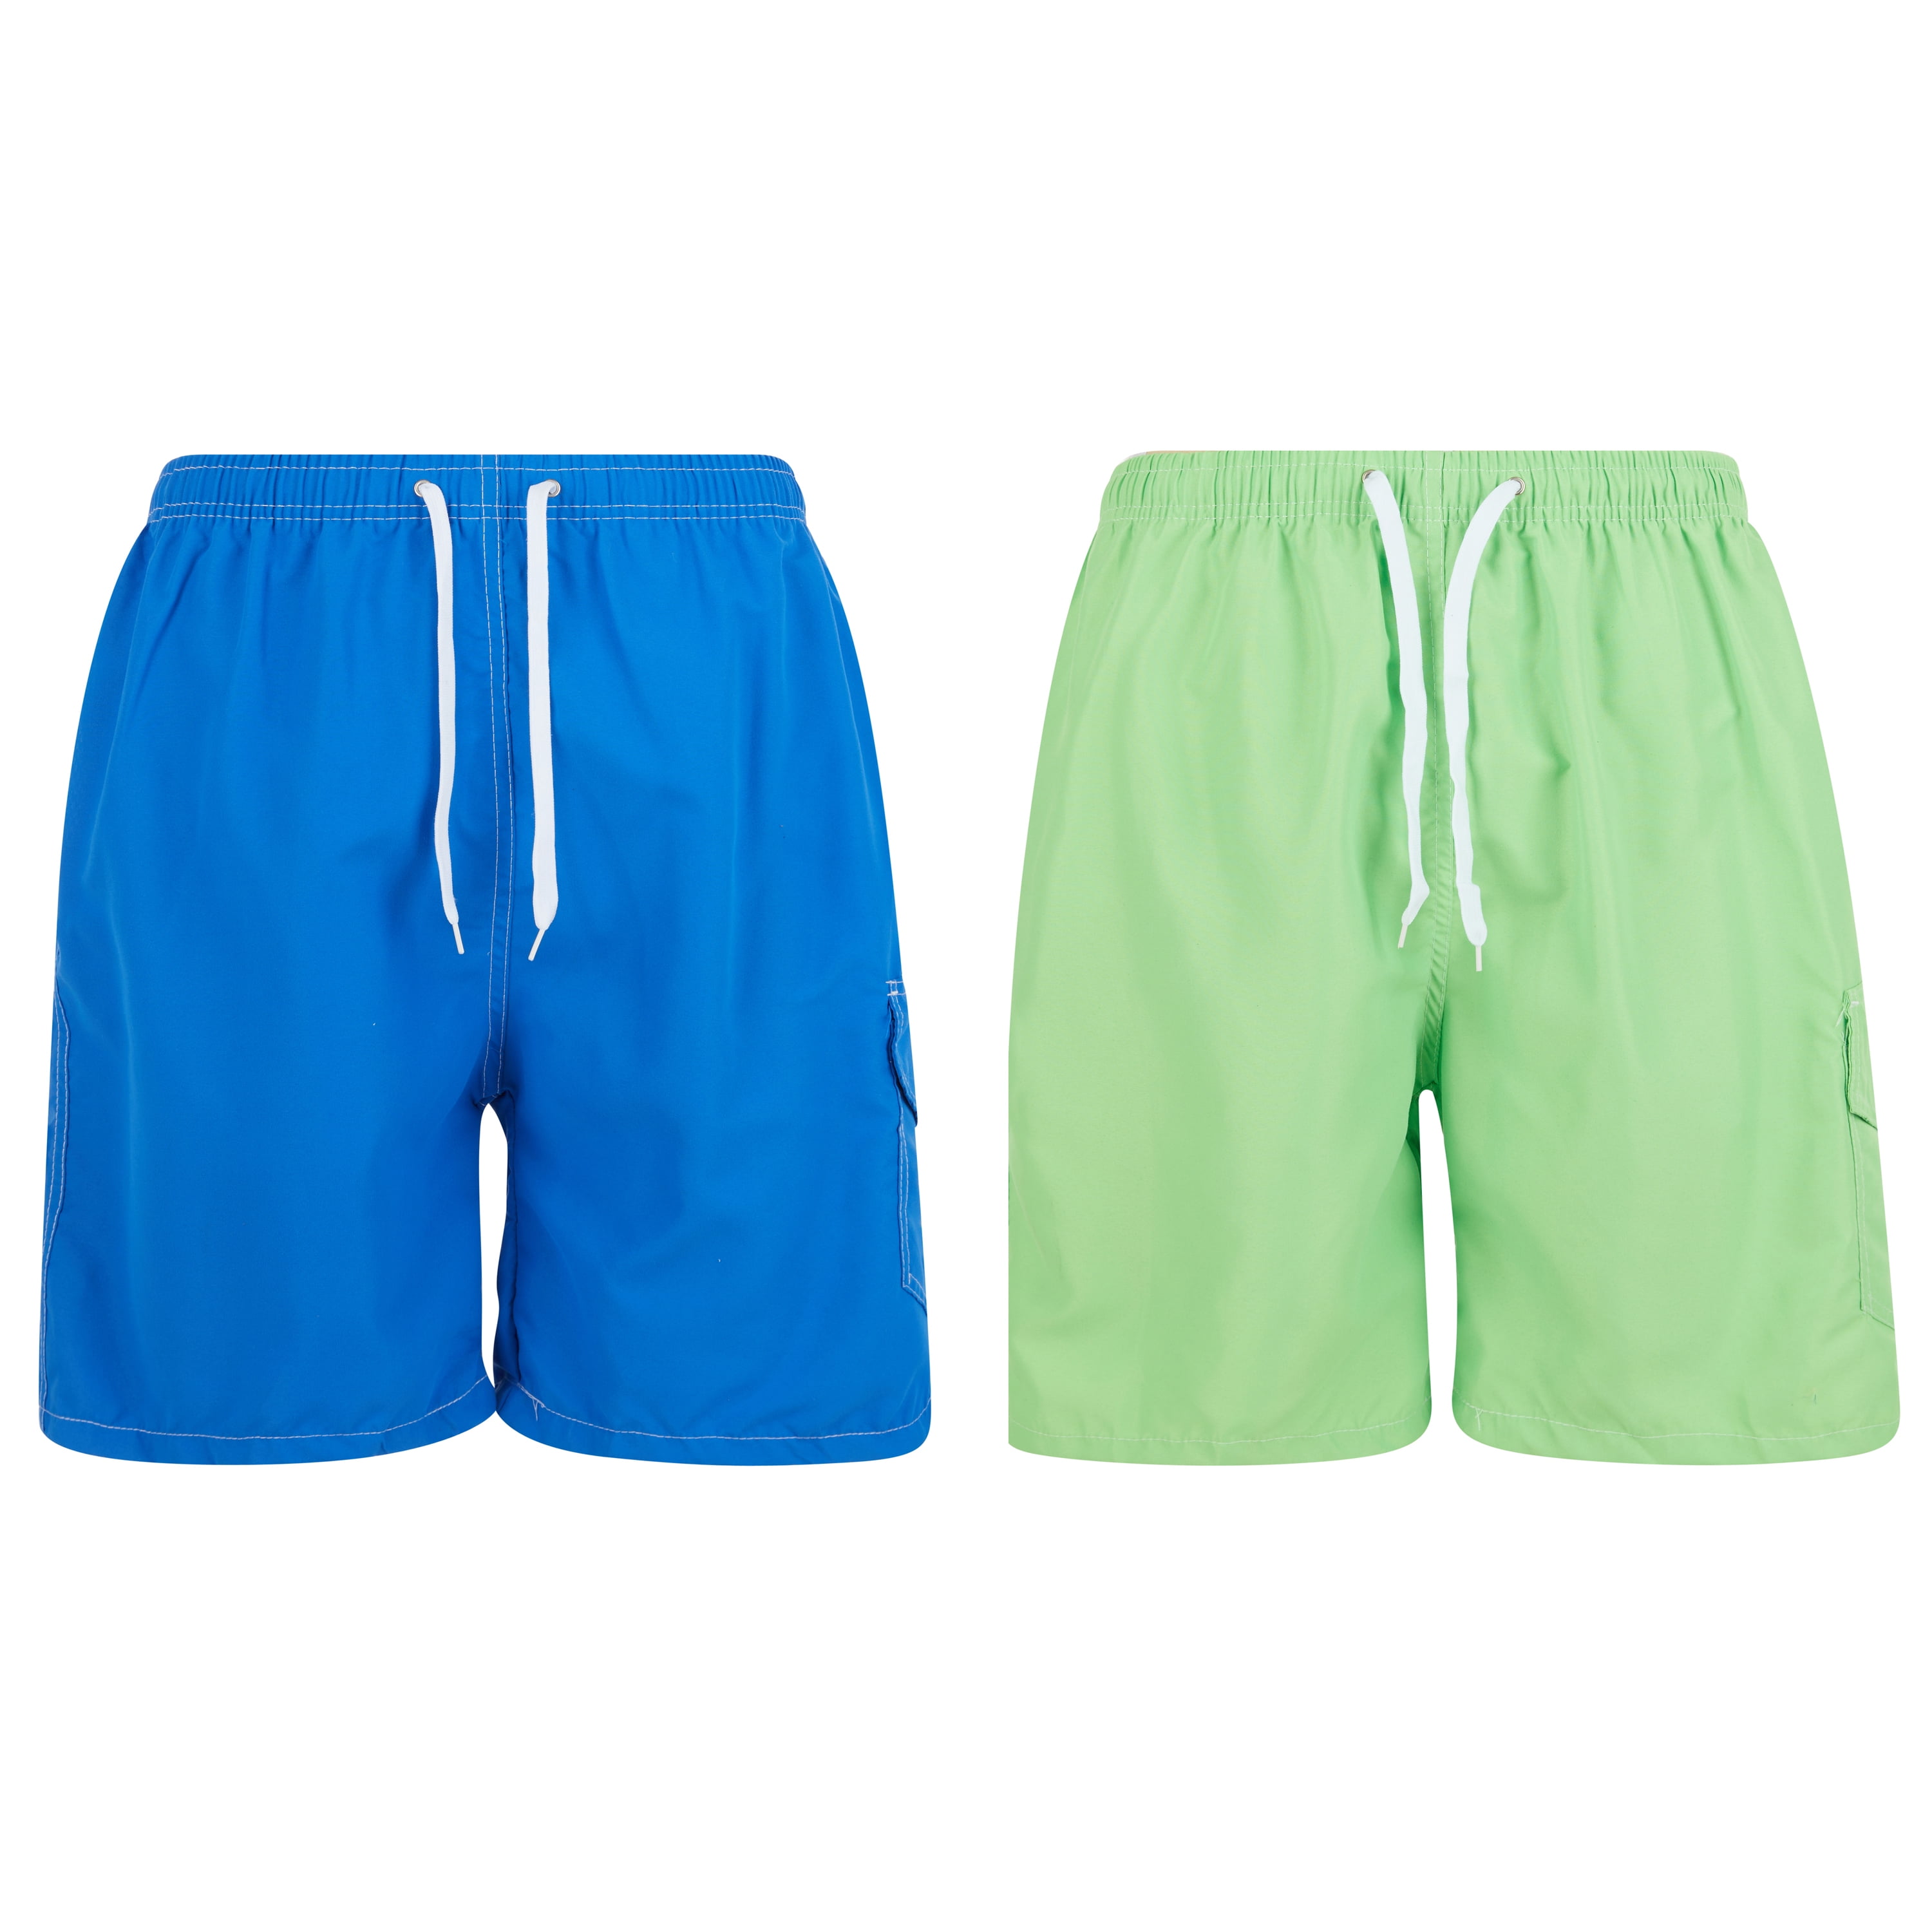 iBerryNY Mens Swim Trunks Quick Dry Cargo Shorts w/ Mesh Lining, 2 Pairs,  Blue/Lime, Large